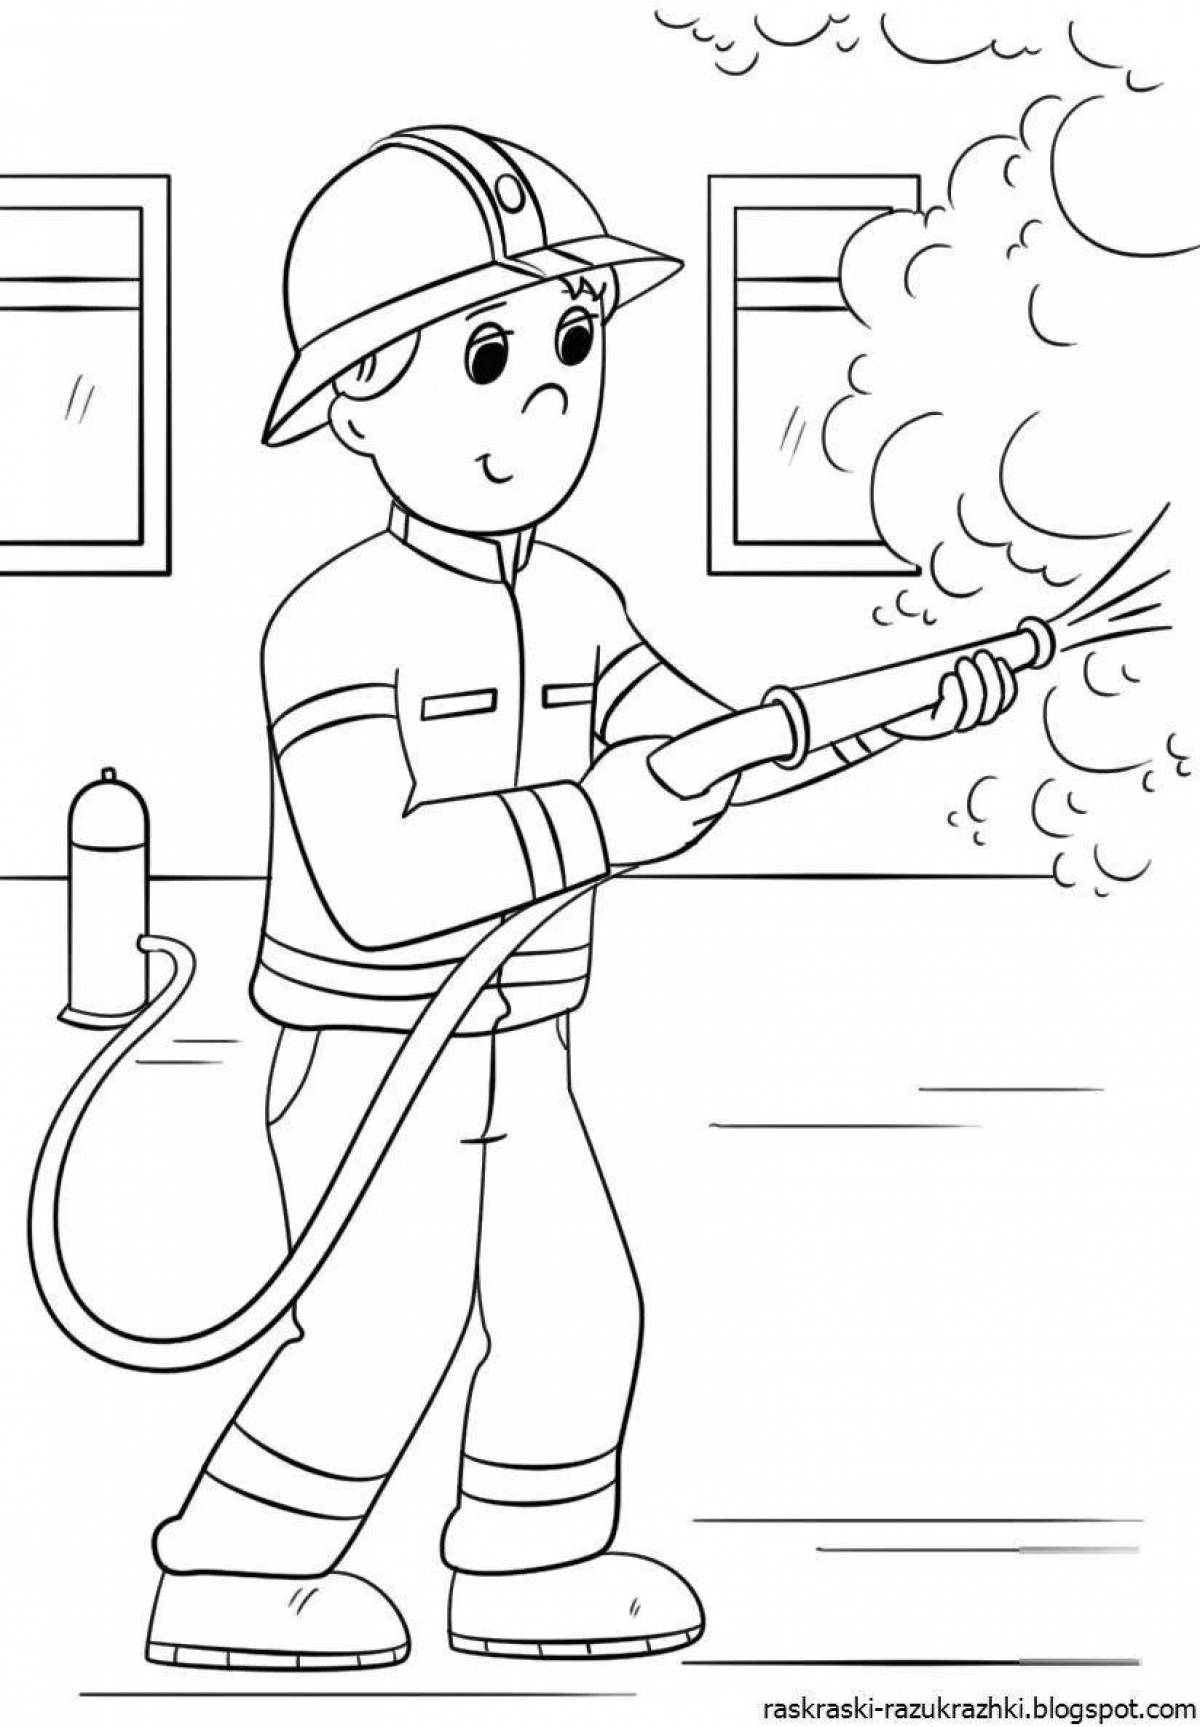 Flashing fire coloring page for kids